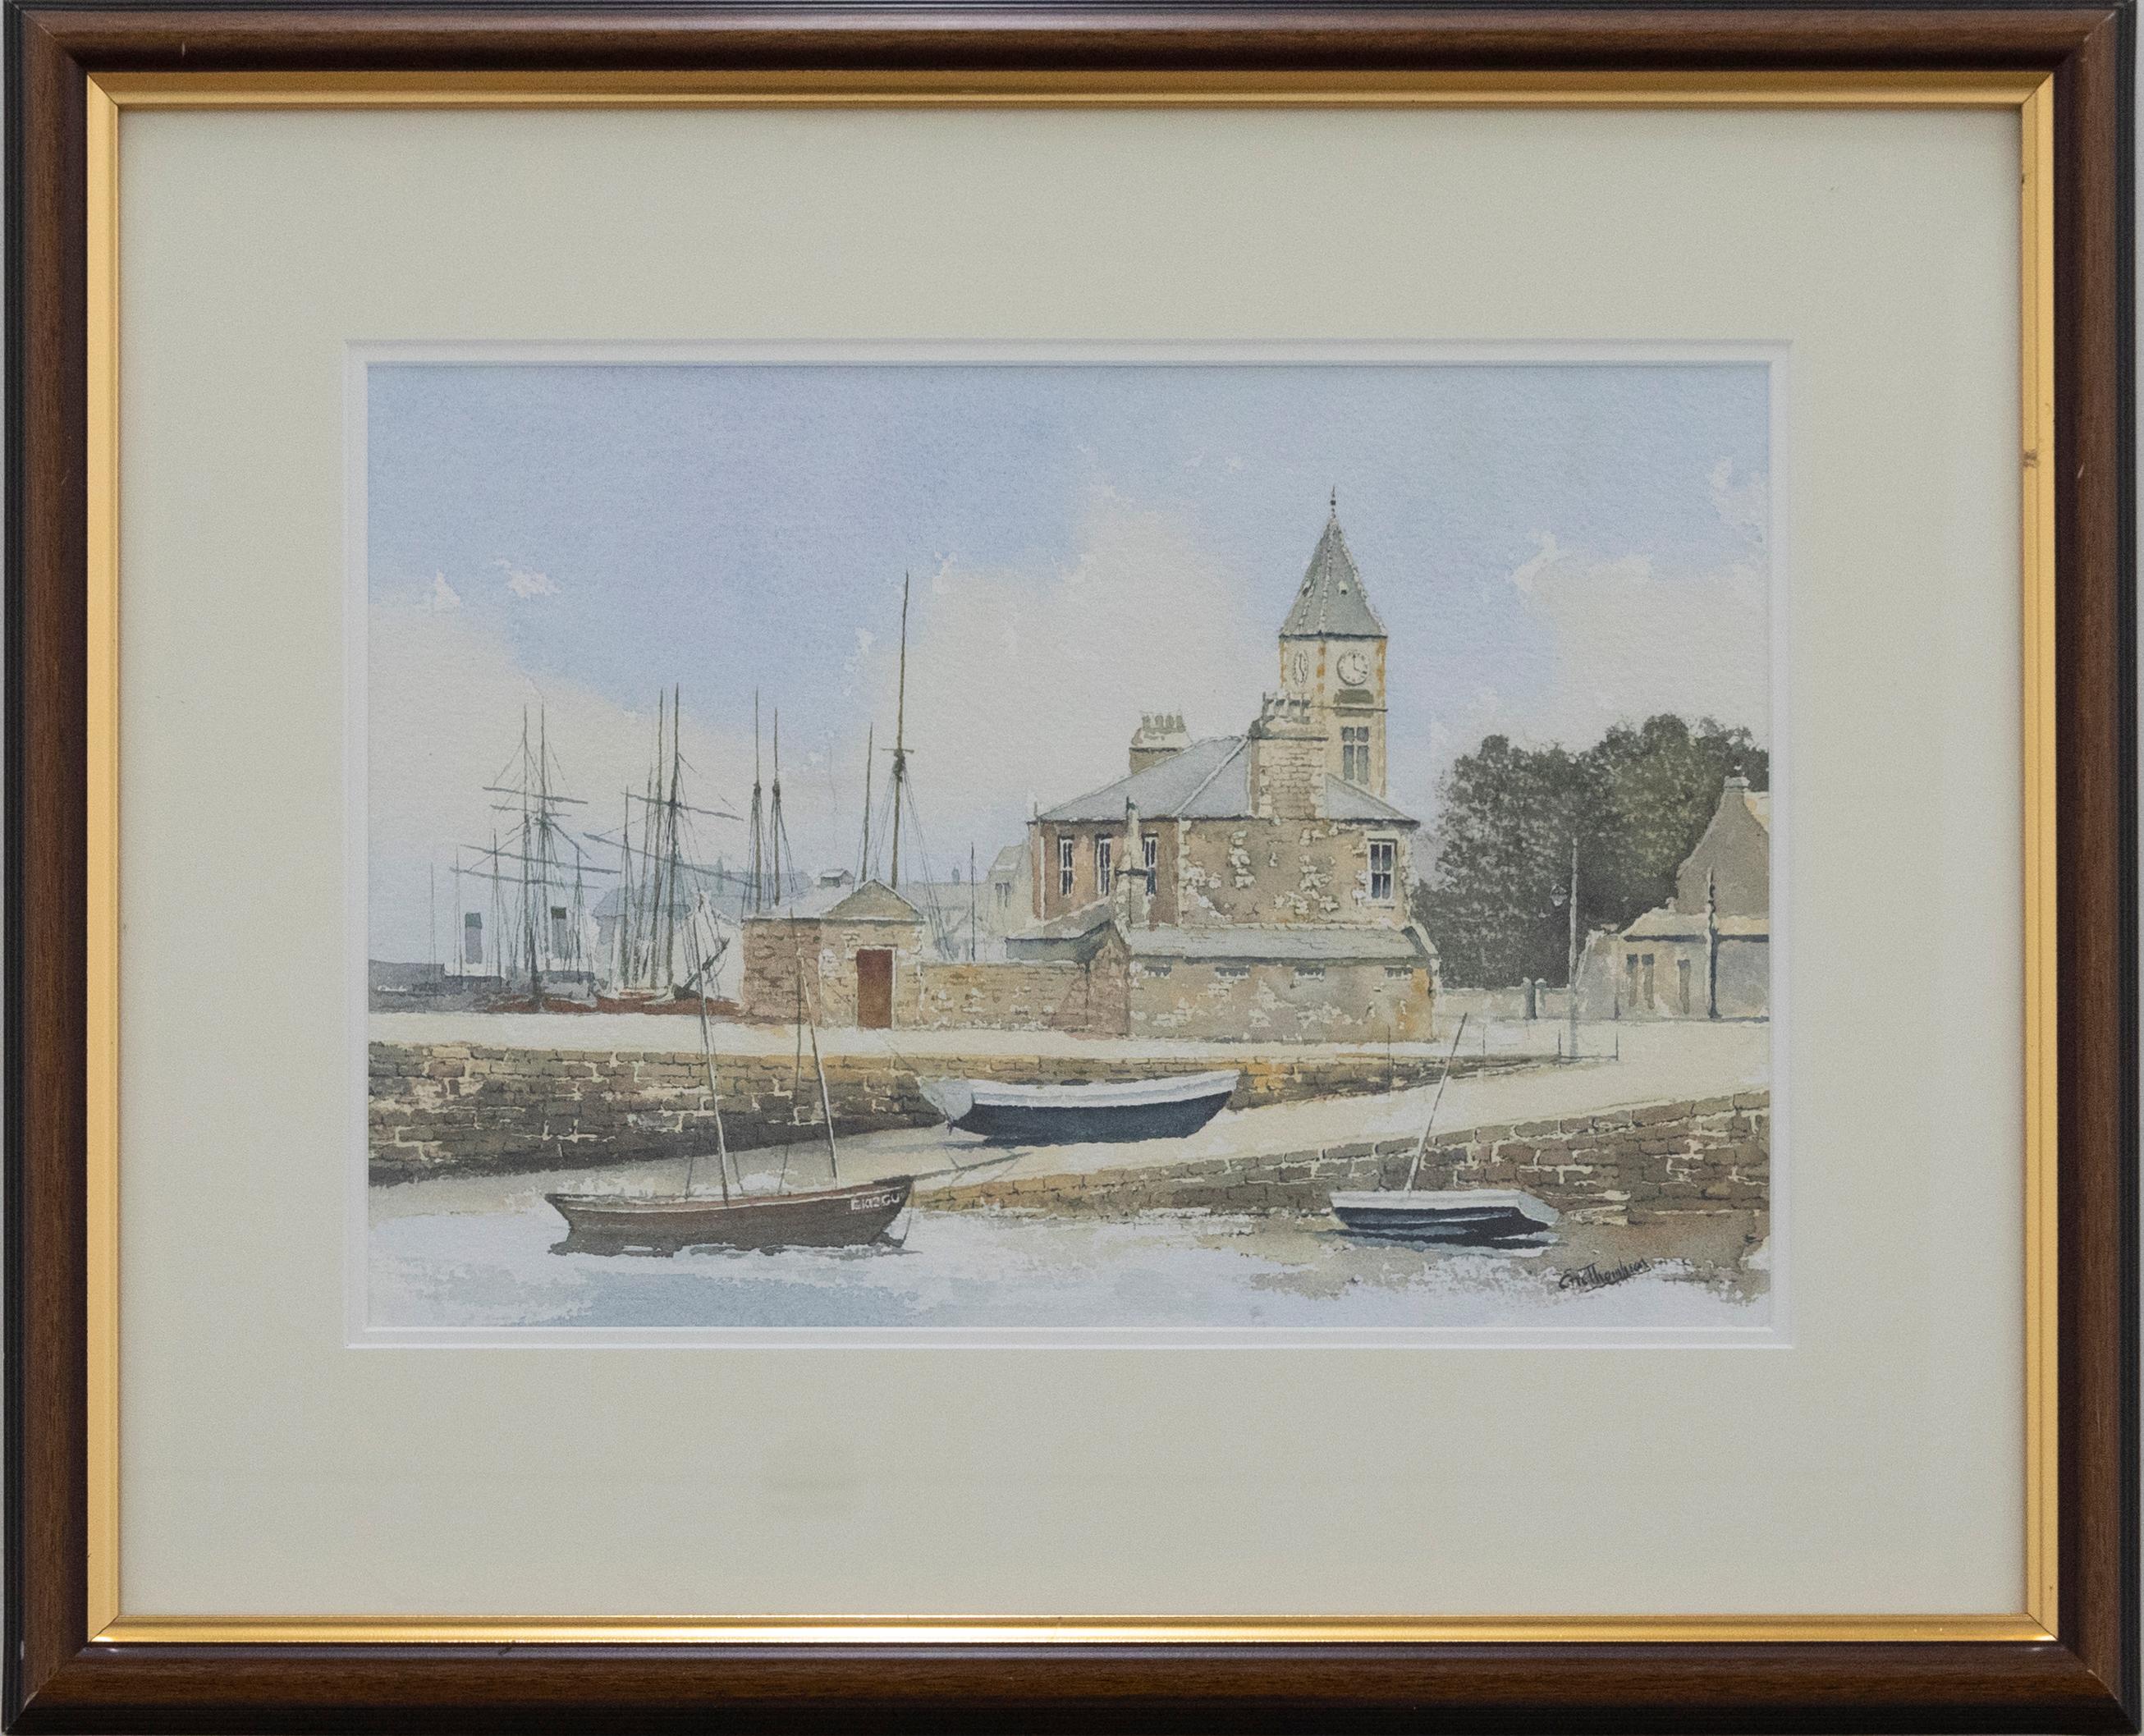 A charming watercolour scene depicting fishing boats lining the dock at St Sampson's, Guernsey. Signed to the lower right. Presented in a wooden frame with a gilt slip. 